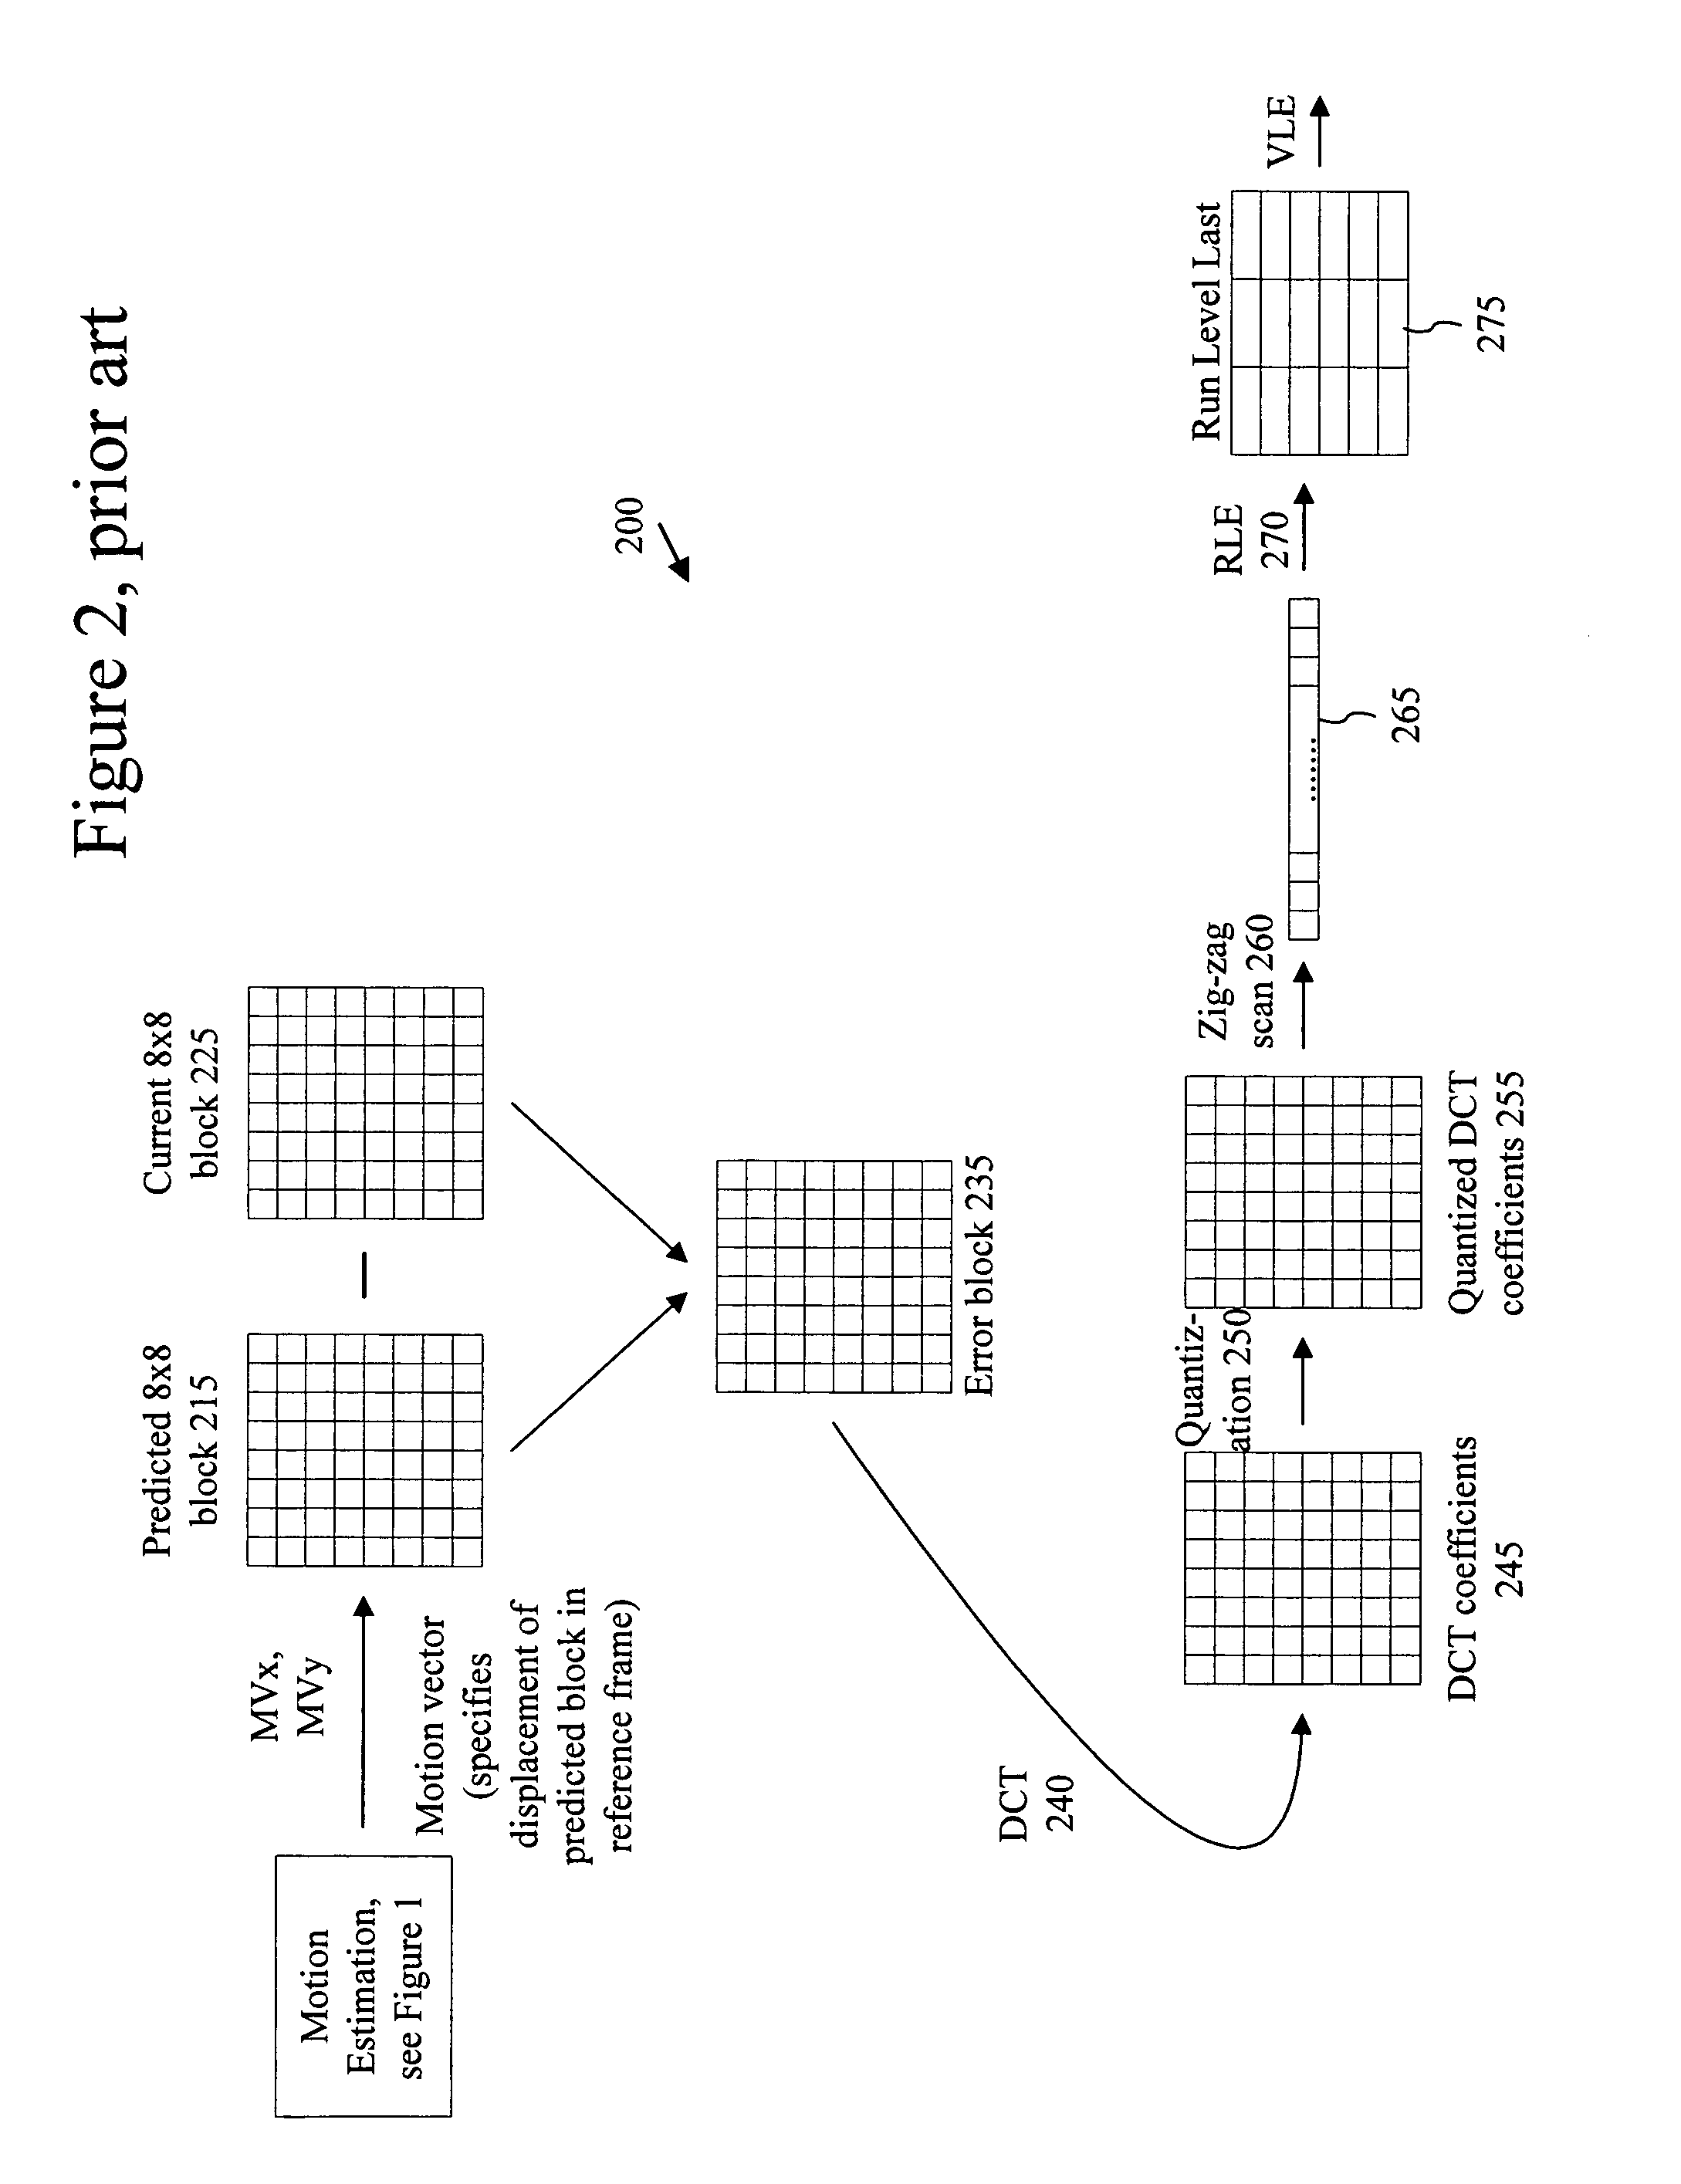 Joint coding and decoding of a reference field selection and differential motion vector information